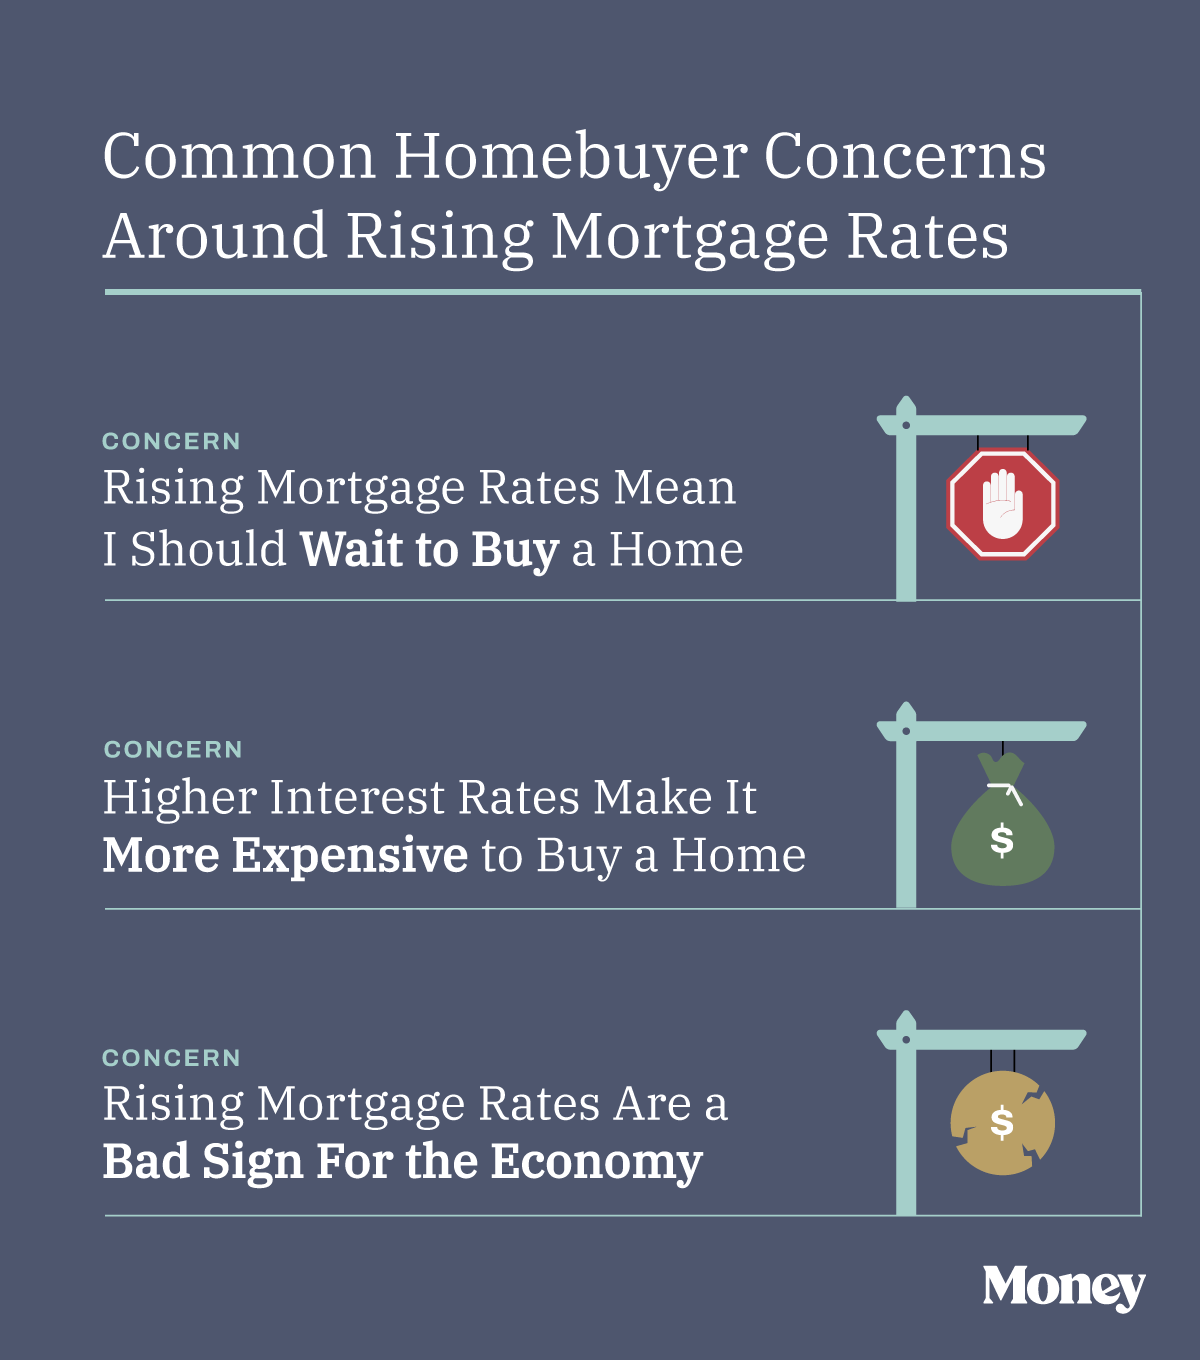 Common Concerns about Rising Mortgage Rates